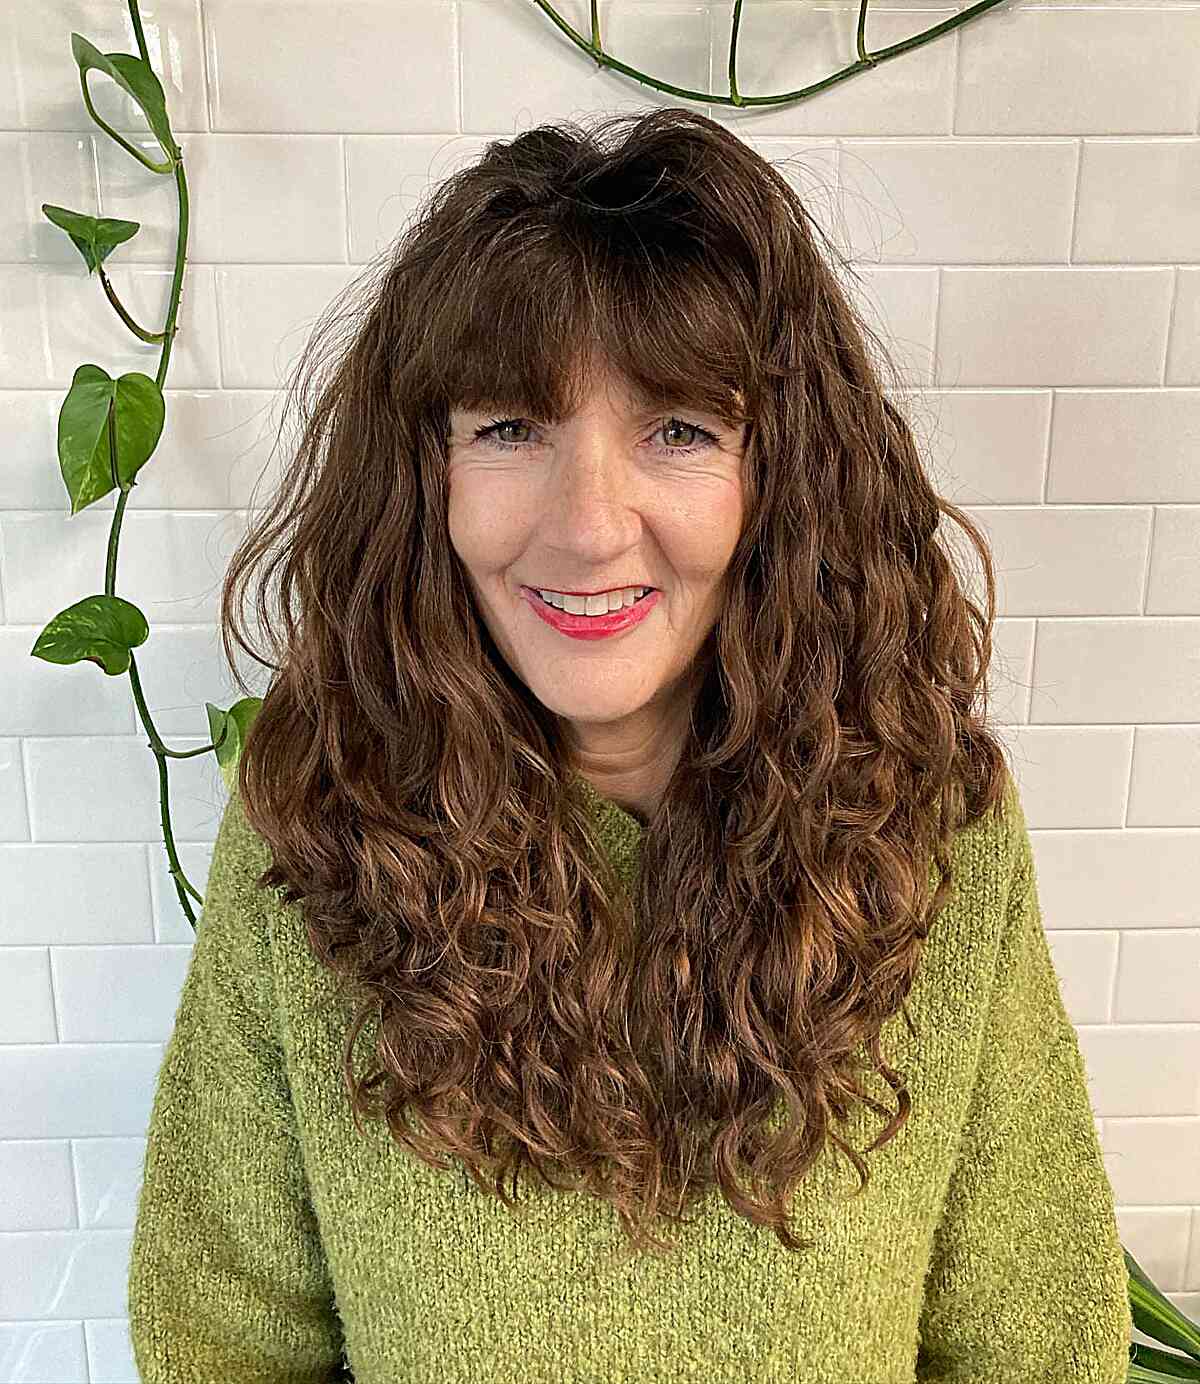 Curled V-Cut Long Hair with Fringe for a 60-year-old